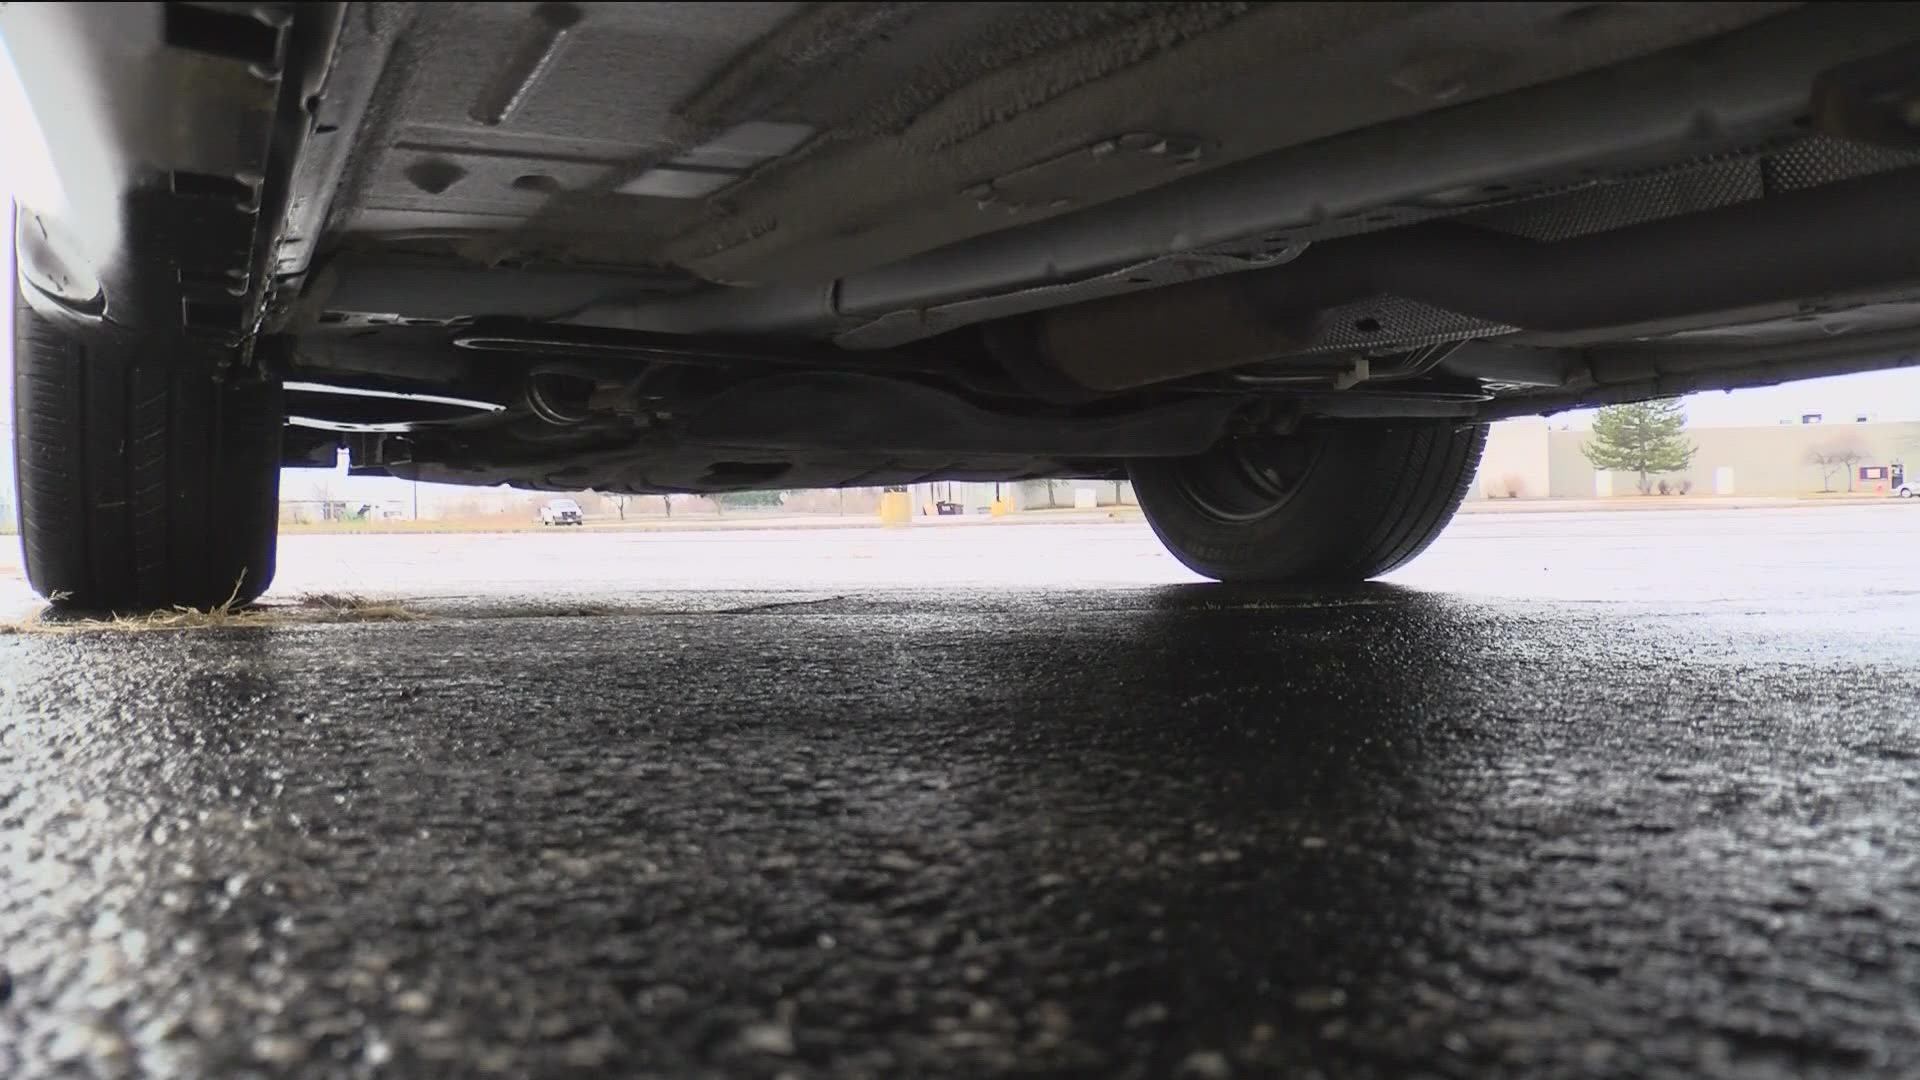 A handful of Toledo Assembly Complex employees say they had the catalytic converters cut off their personal vehicles while they were inside the plant working.